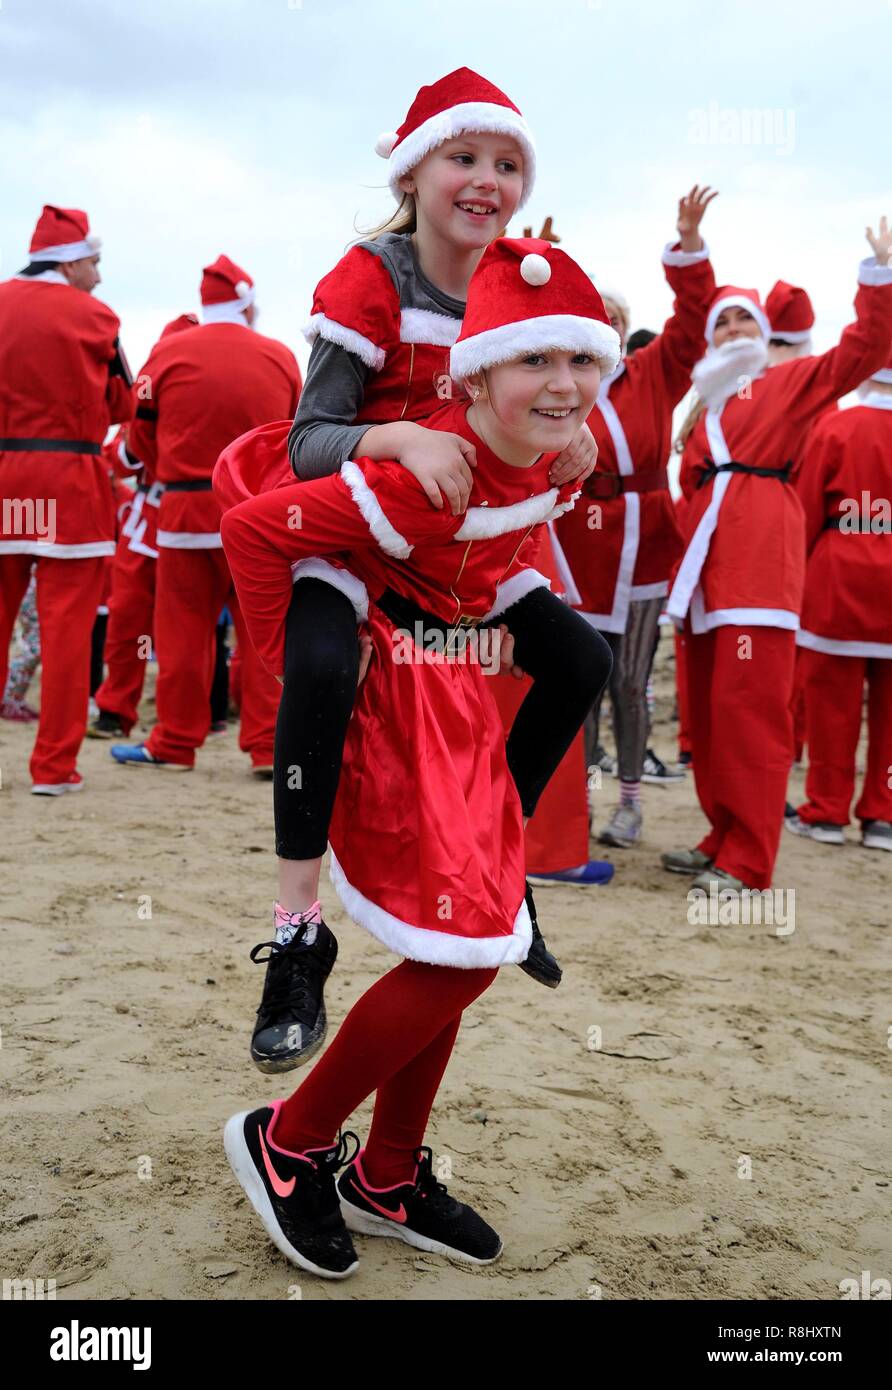 Chase the Pudding Will is a 5 km race along Weymouth beach dressed as Santa and chasing a Christmas Pudding and raising money for the popular local charity the Will Mackaness Trust. Credit: Finnbarr Webster/Alamy Live News Stock Photo